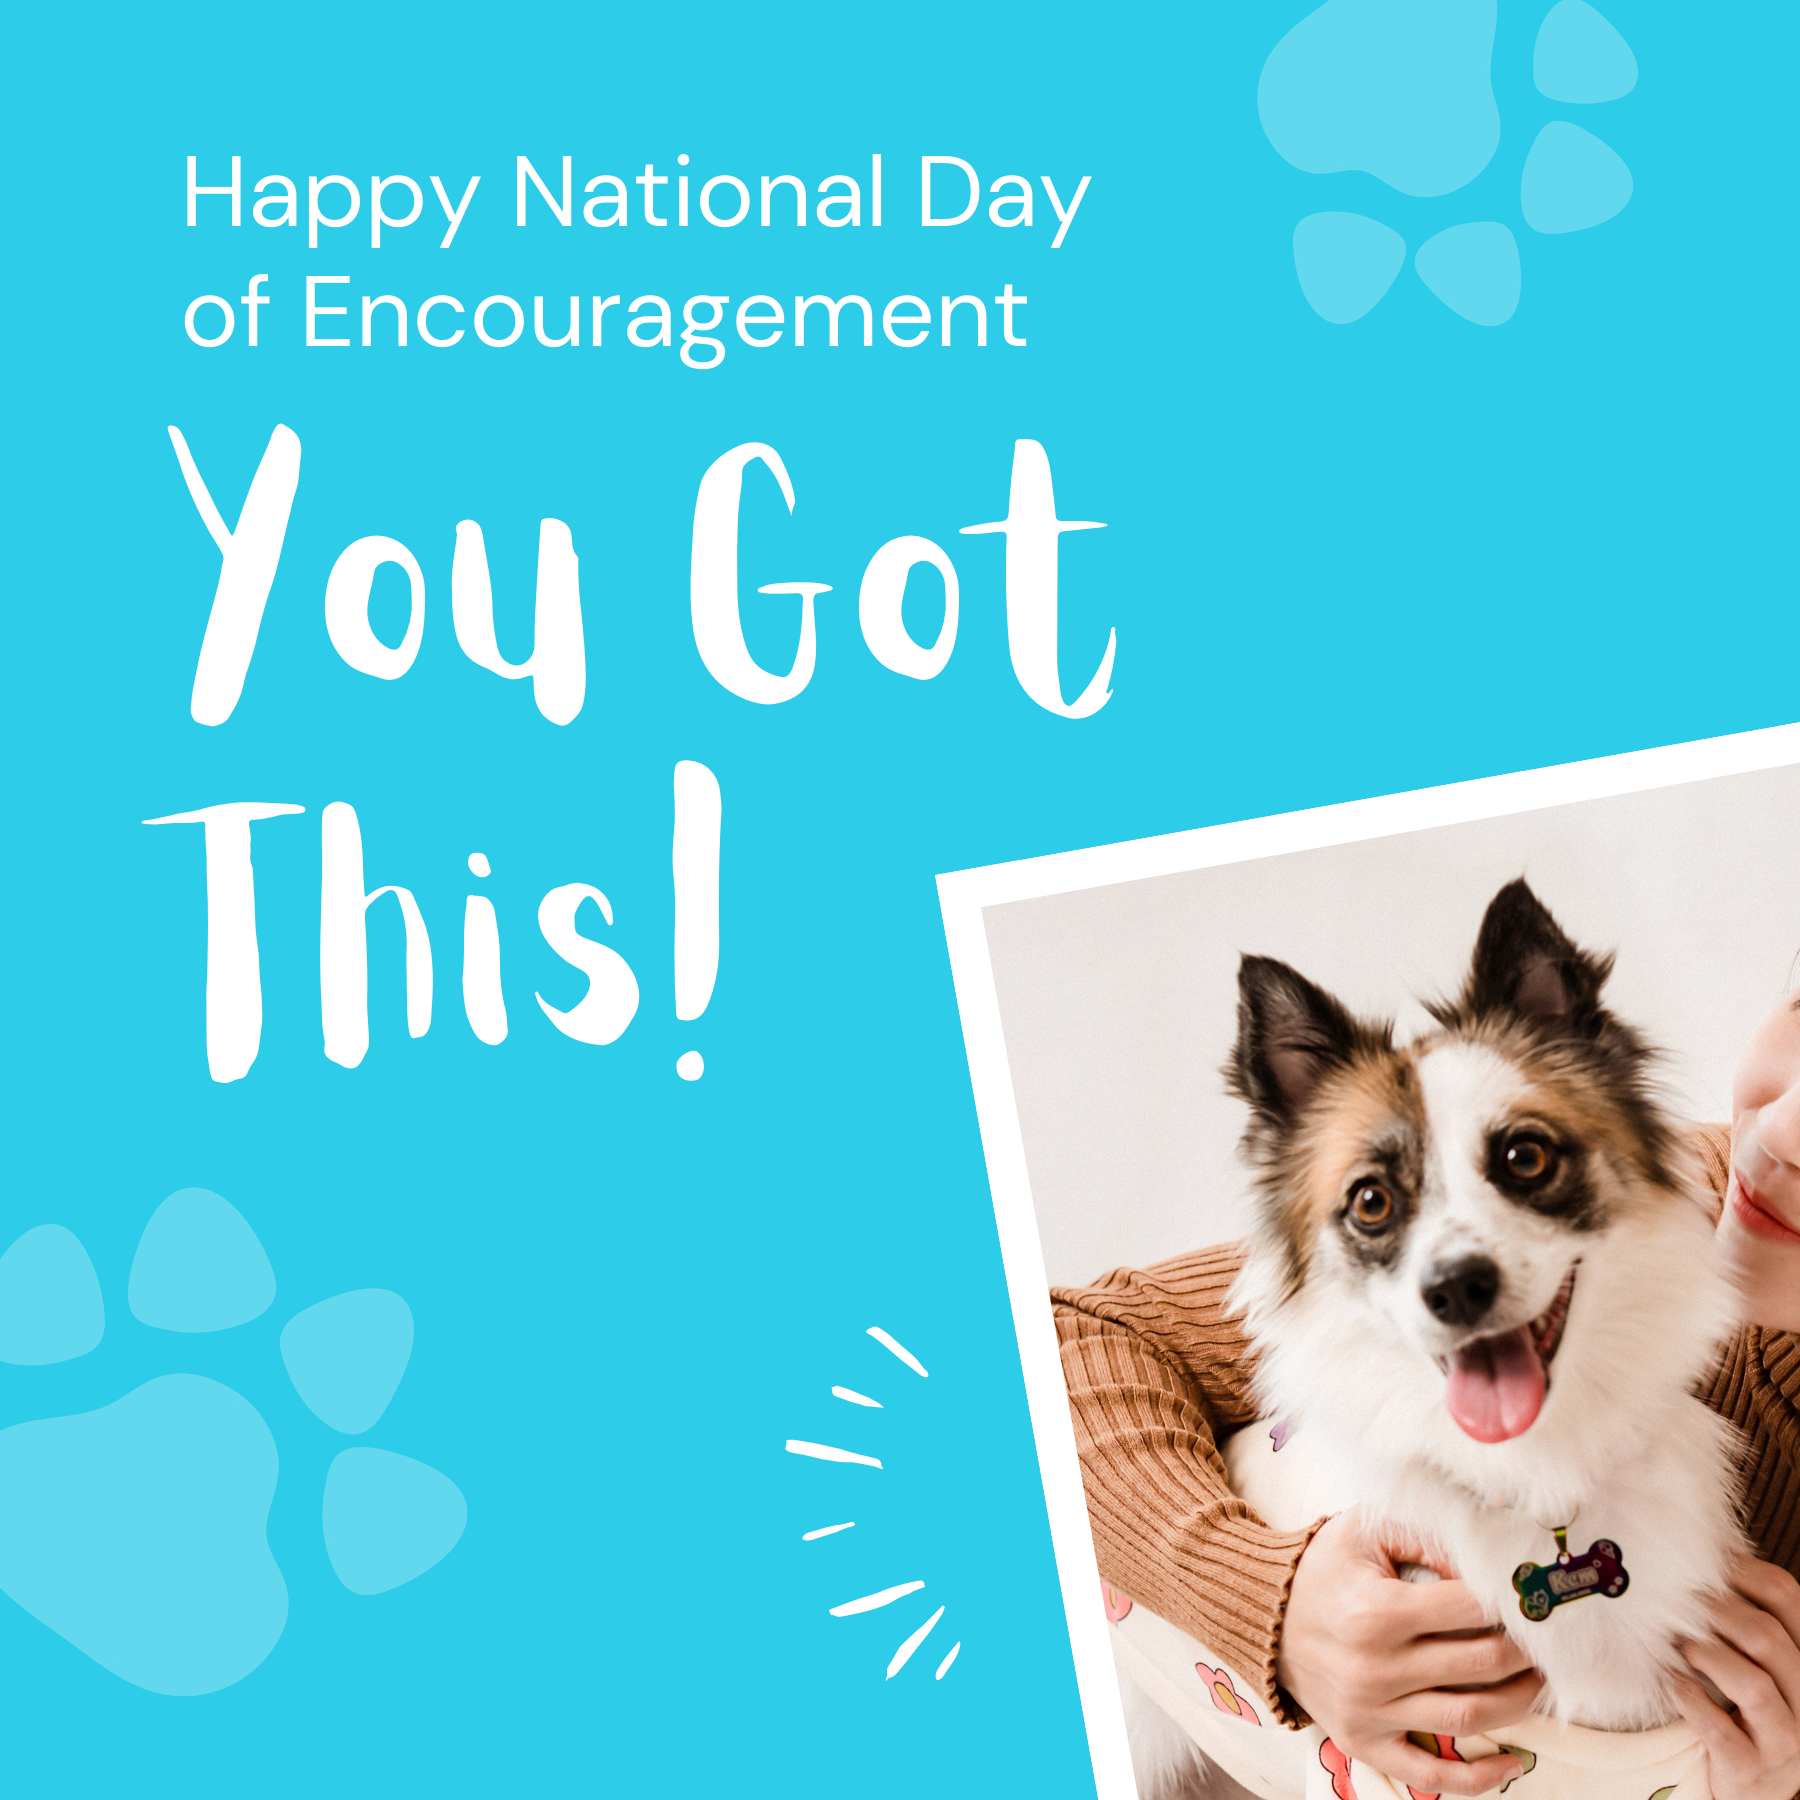 Happy National Day of Encouragement